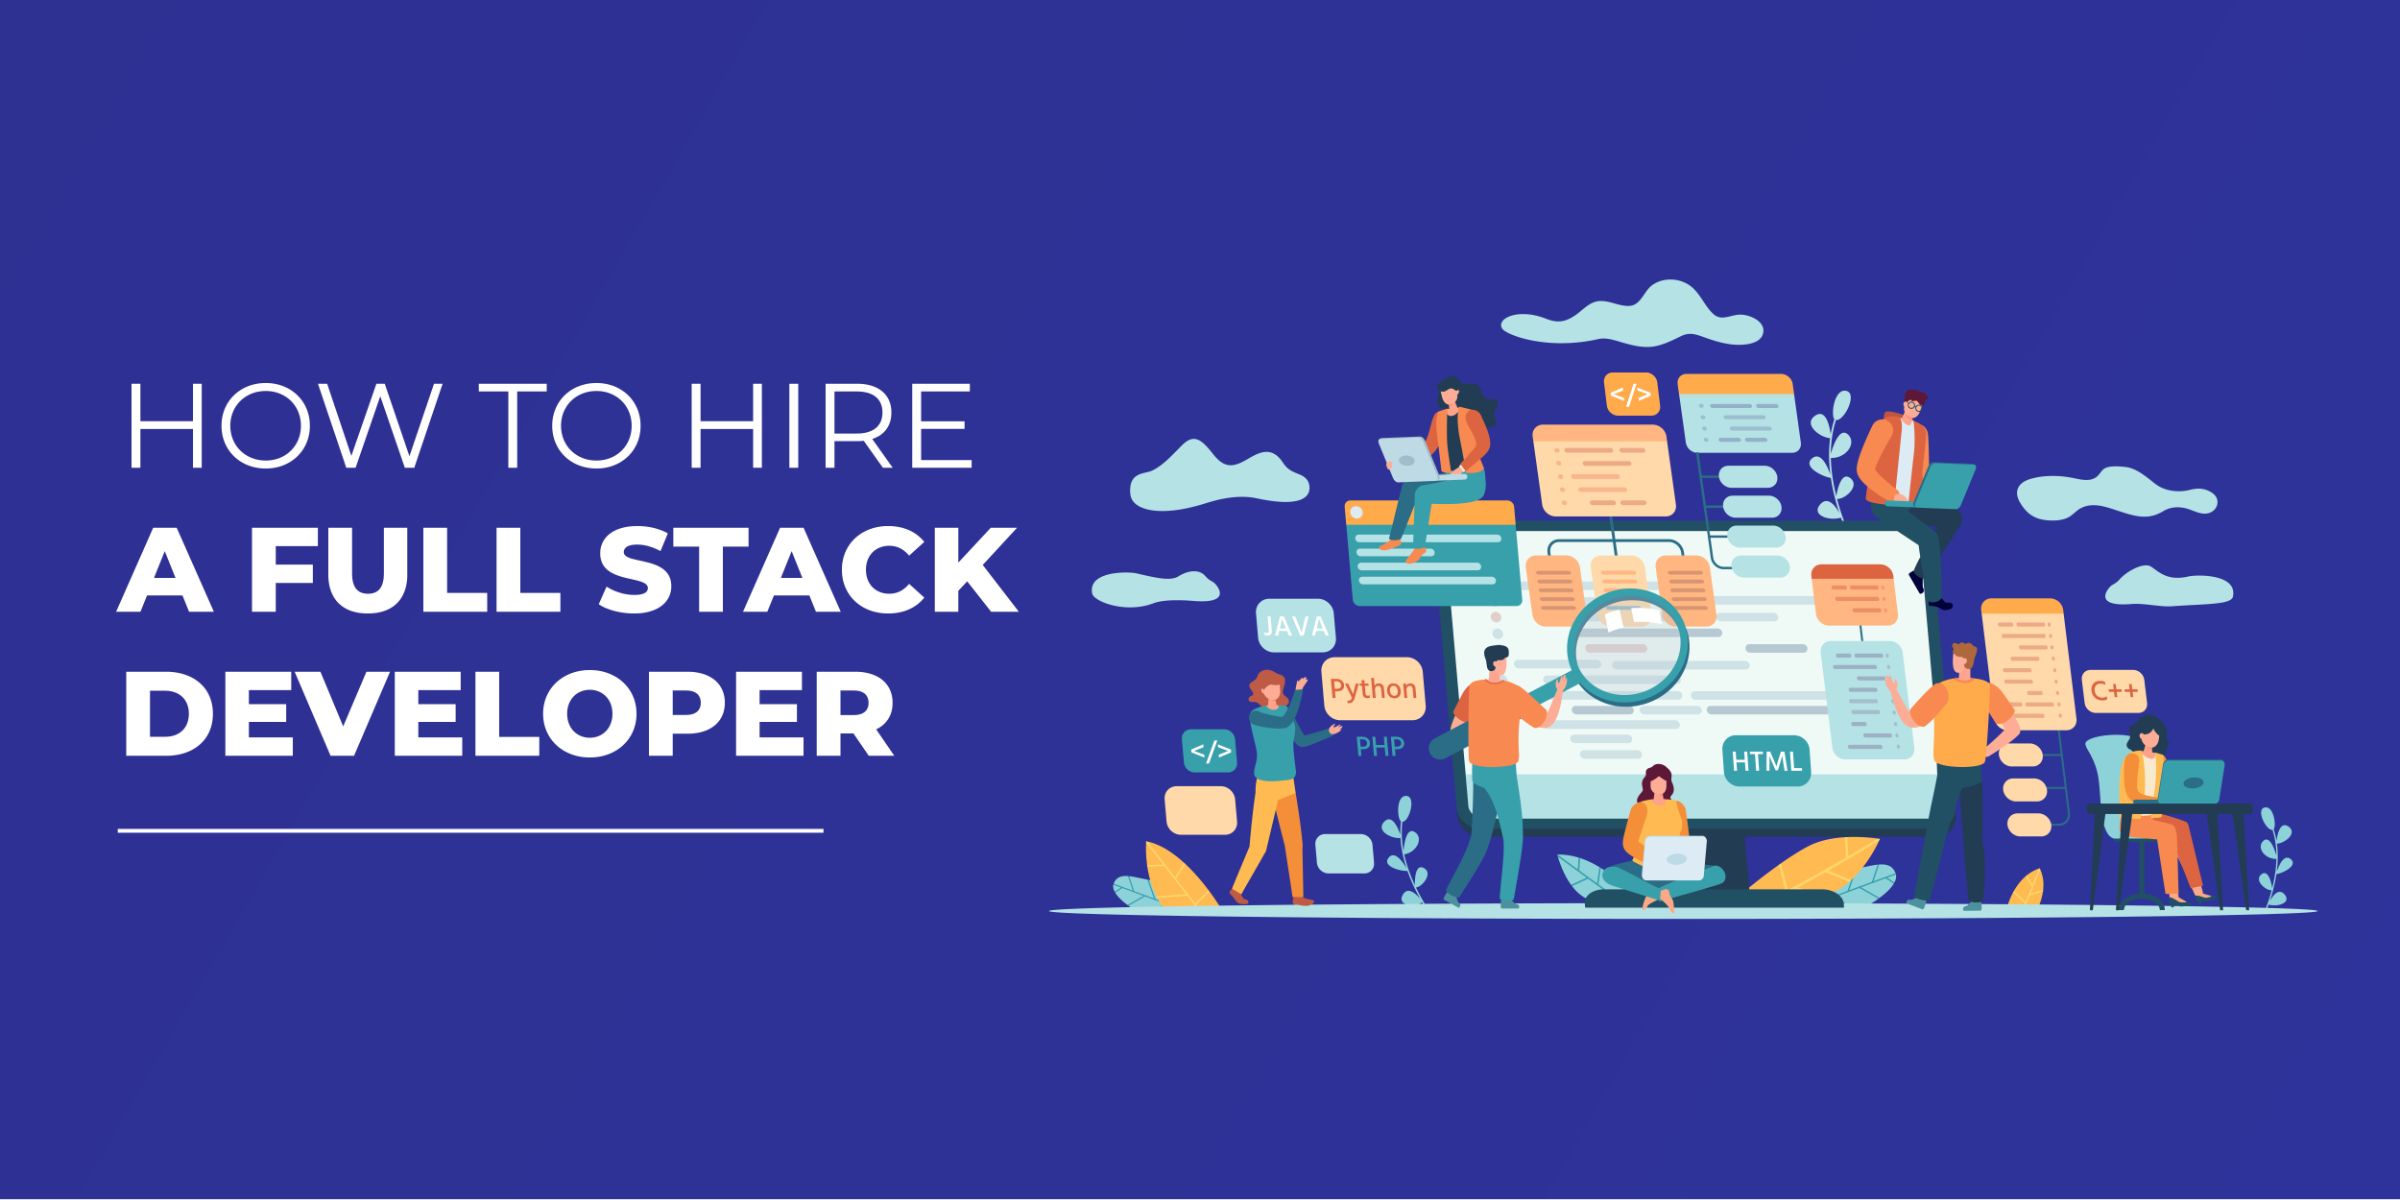 How to Hire Full Stack Developer